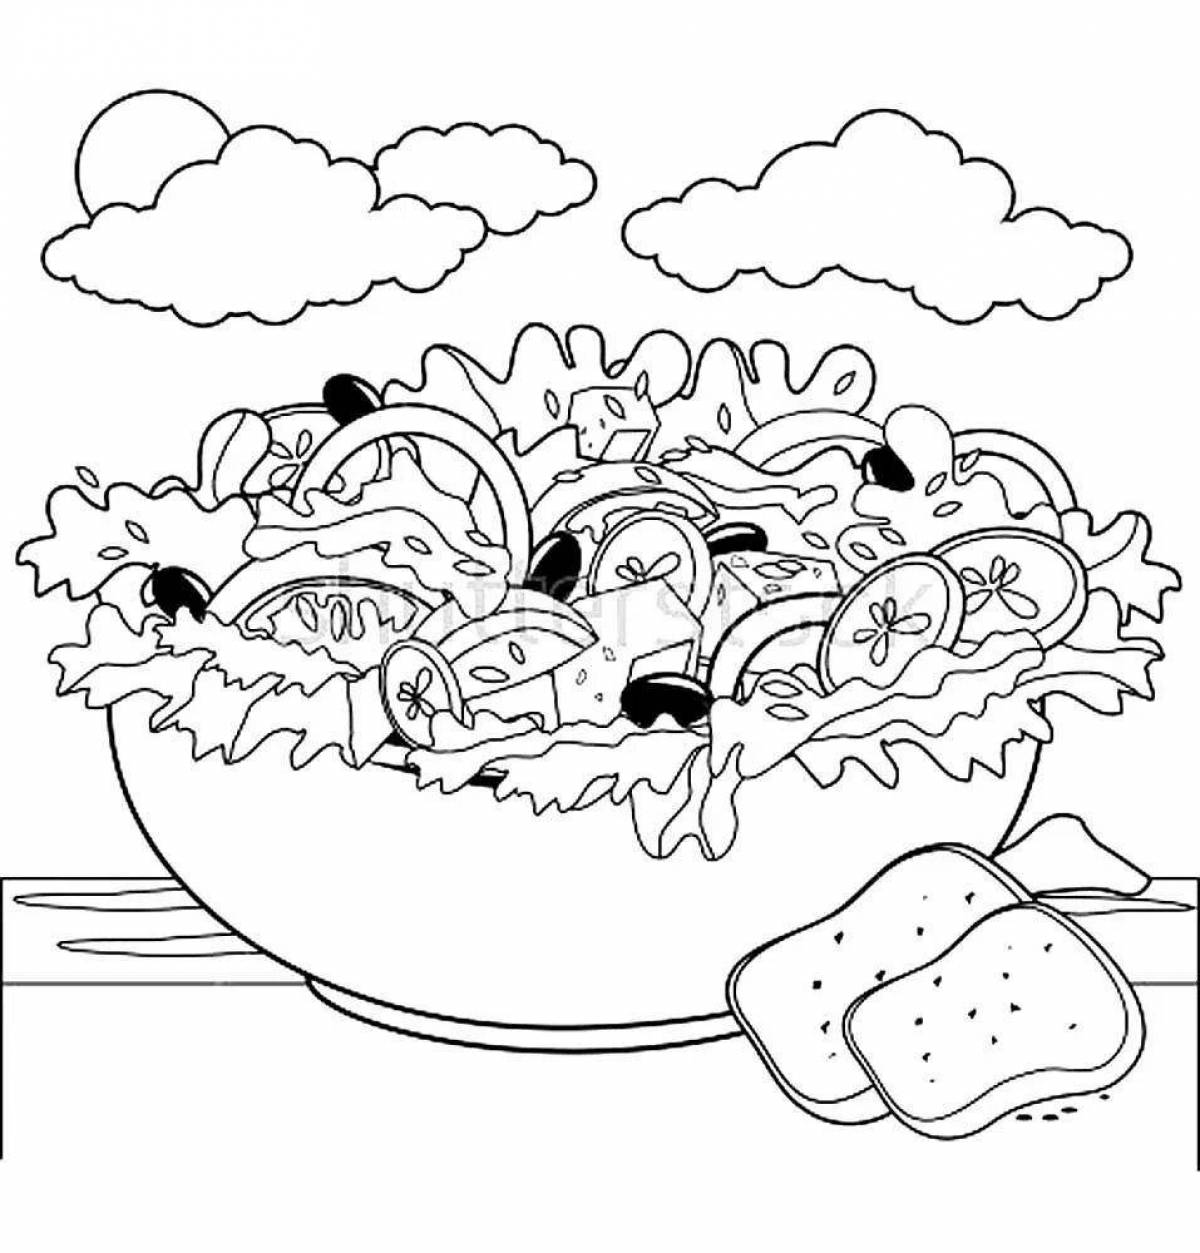 Colorful vegetable salad coloring book